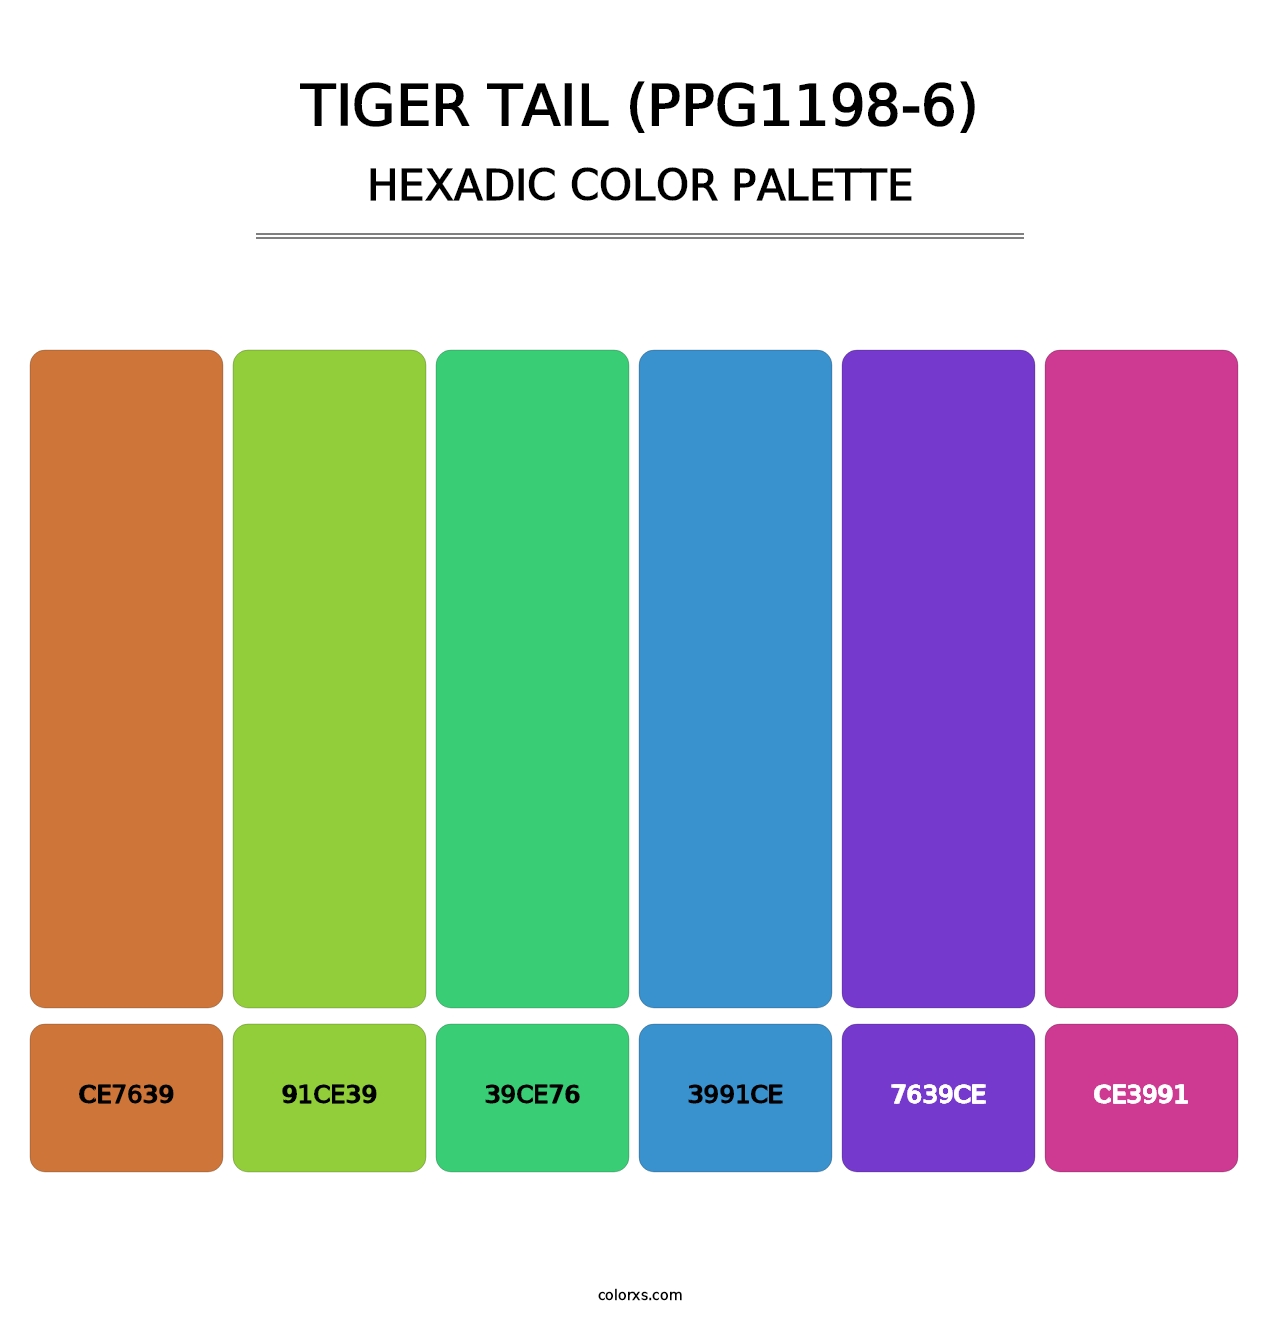 Tiger Tail (PPG1198-6) - Hexadic Color Palette